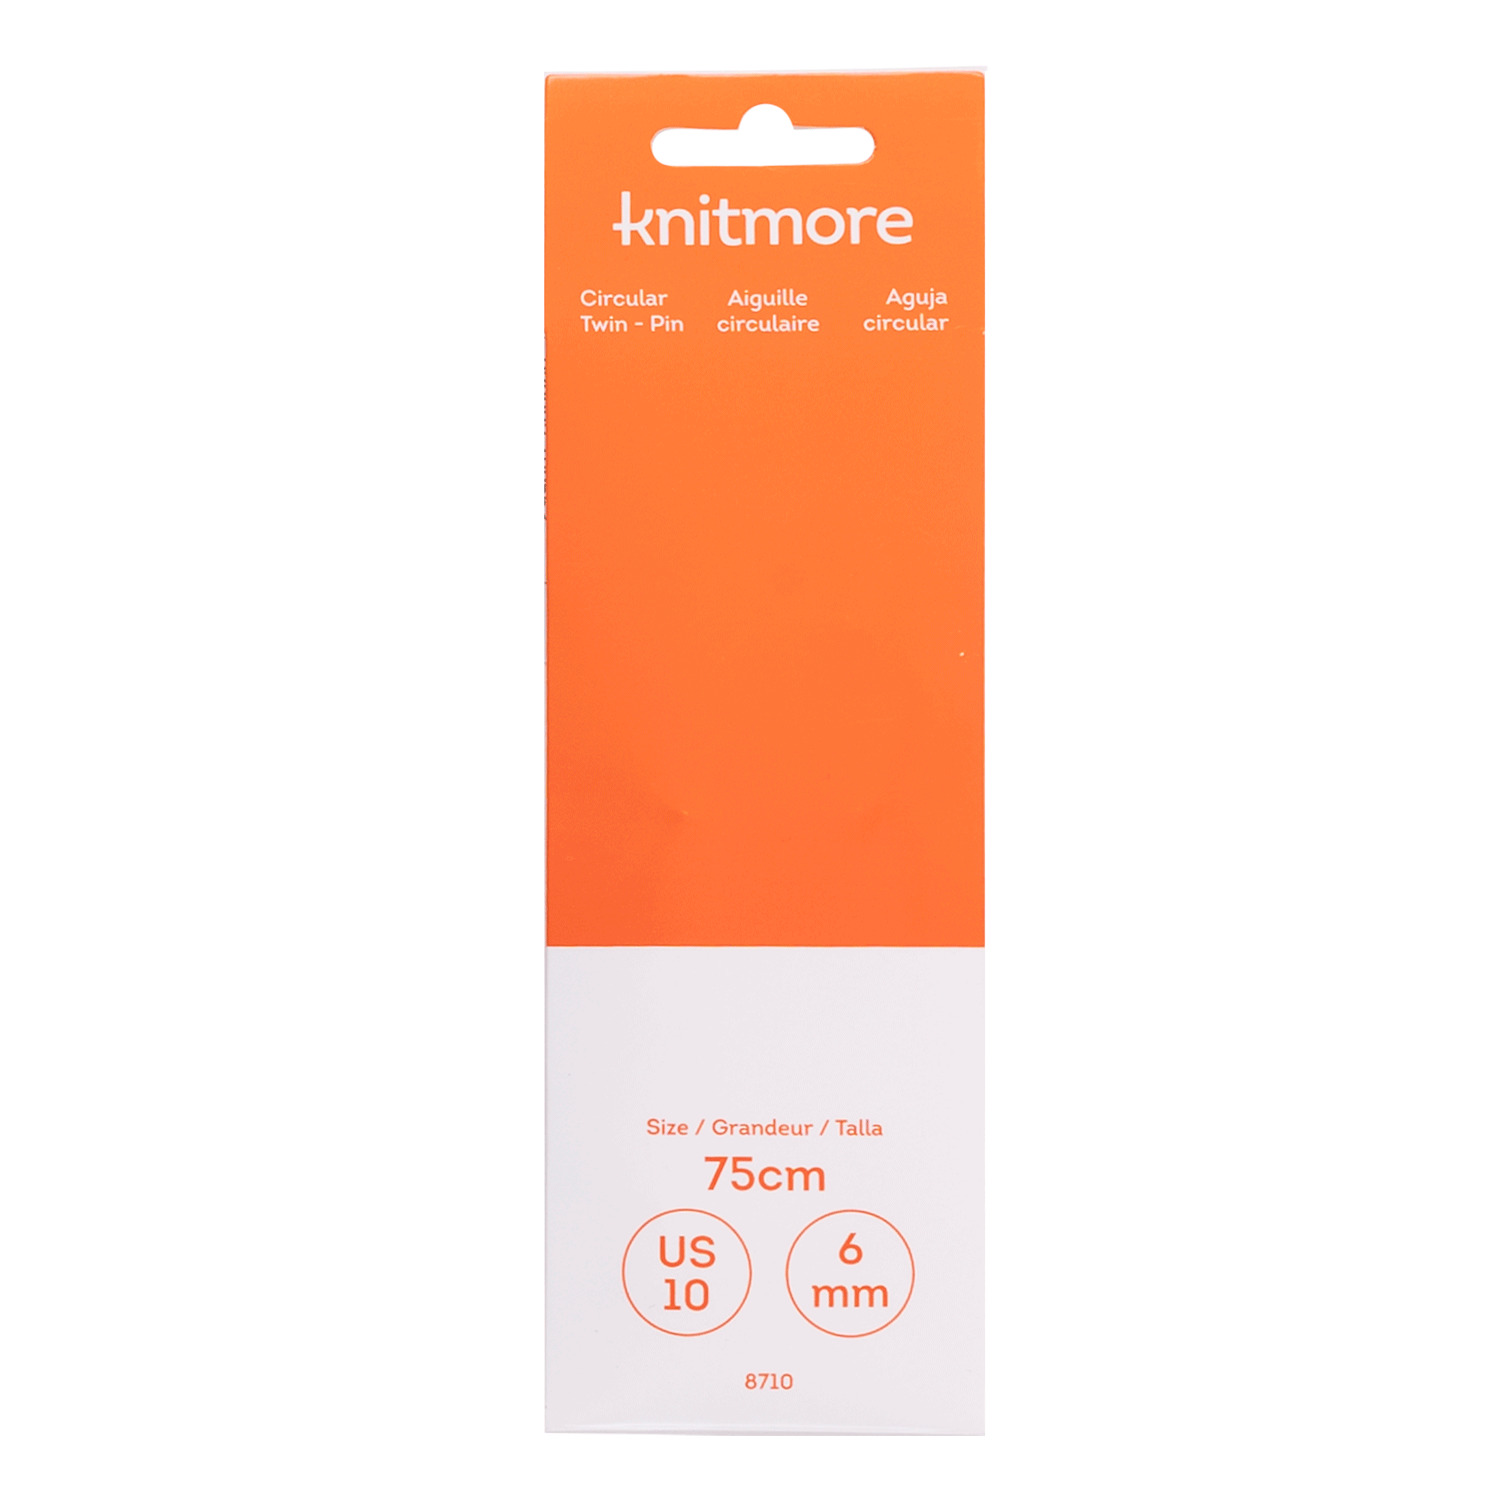 Knitmore - Sewing needles 6 mm Size: 75 cm